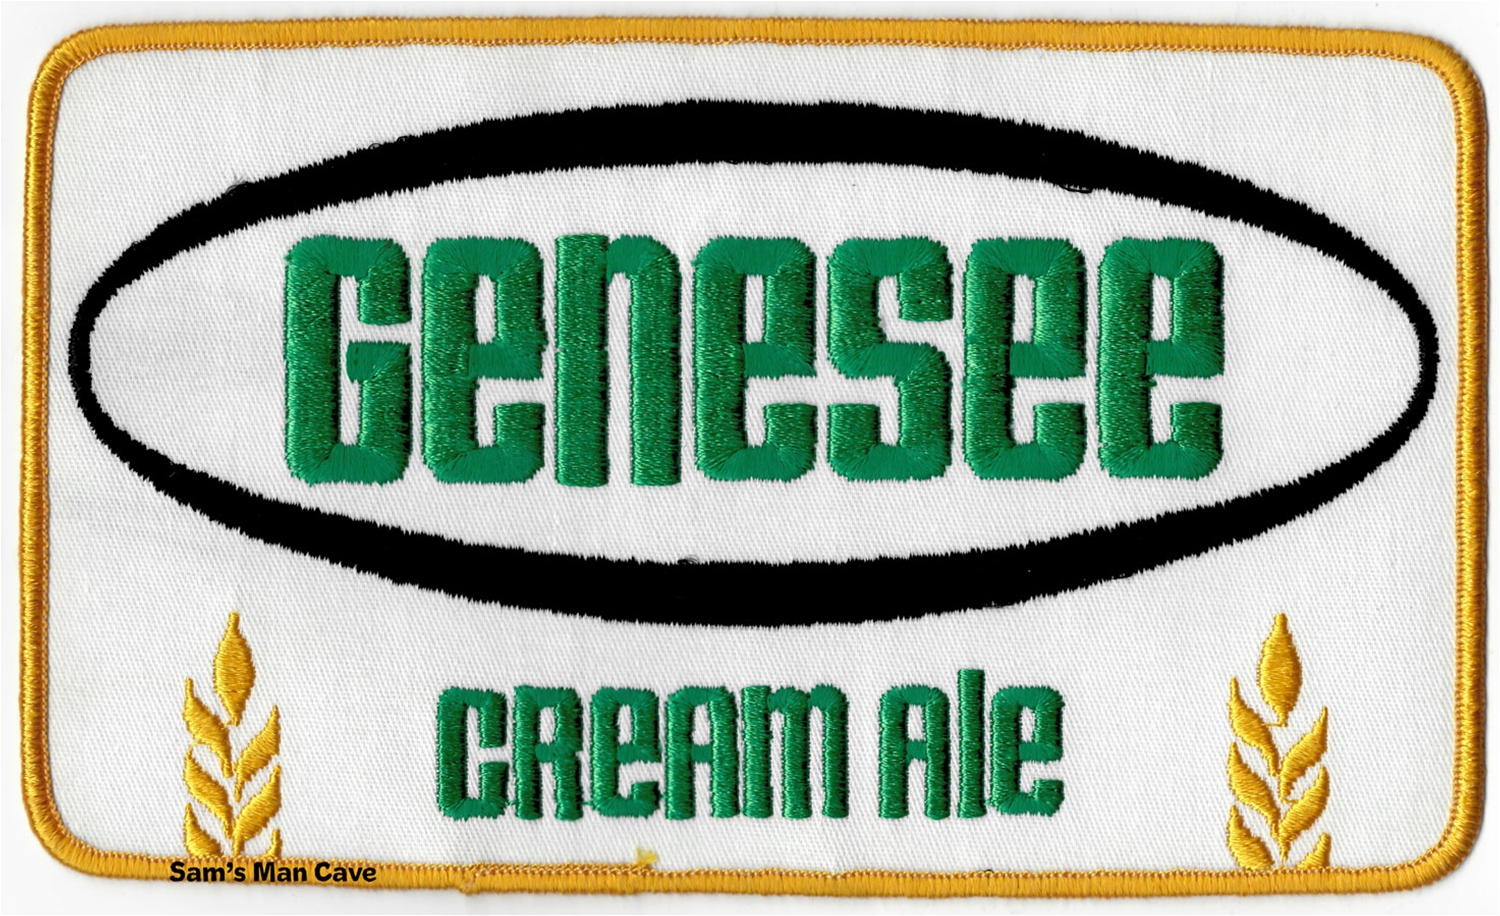 Genesee Cream Ale Large Patch